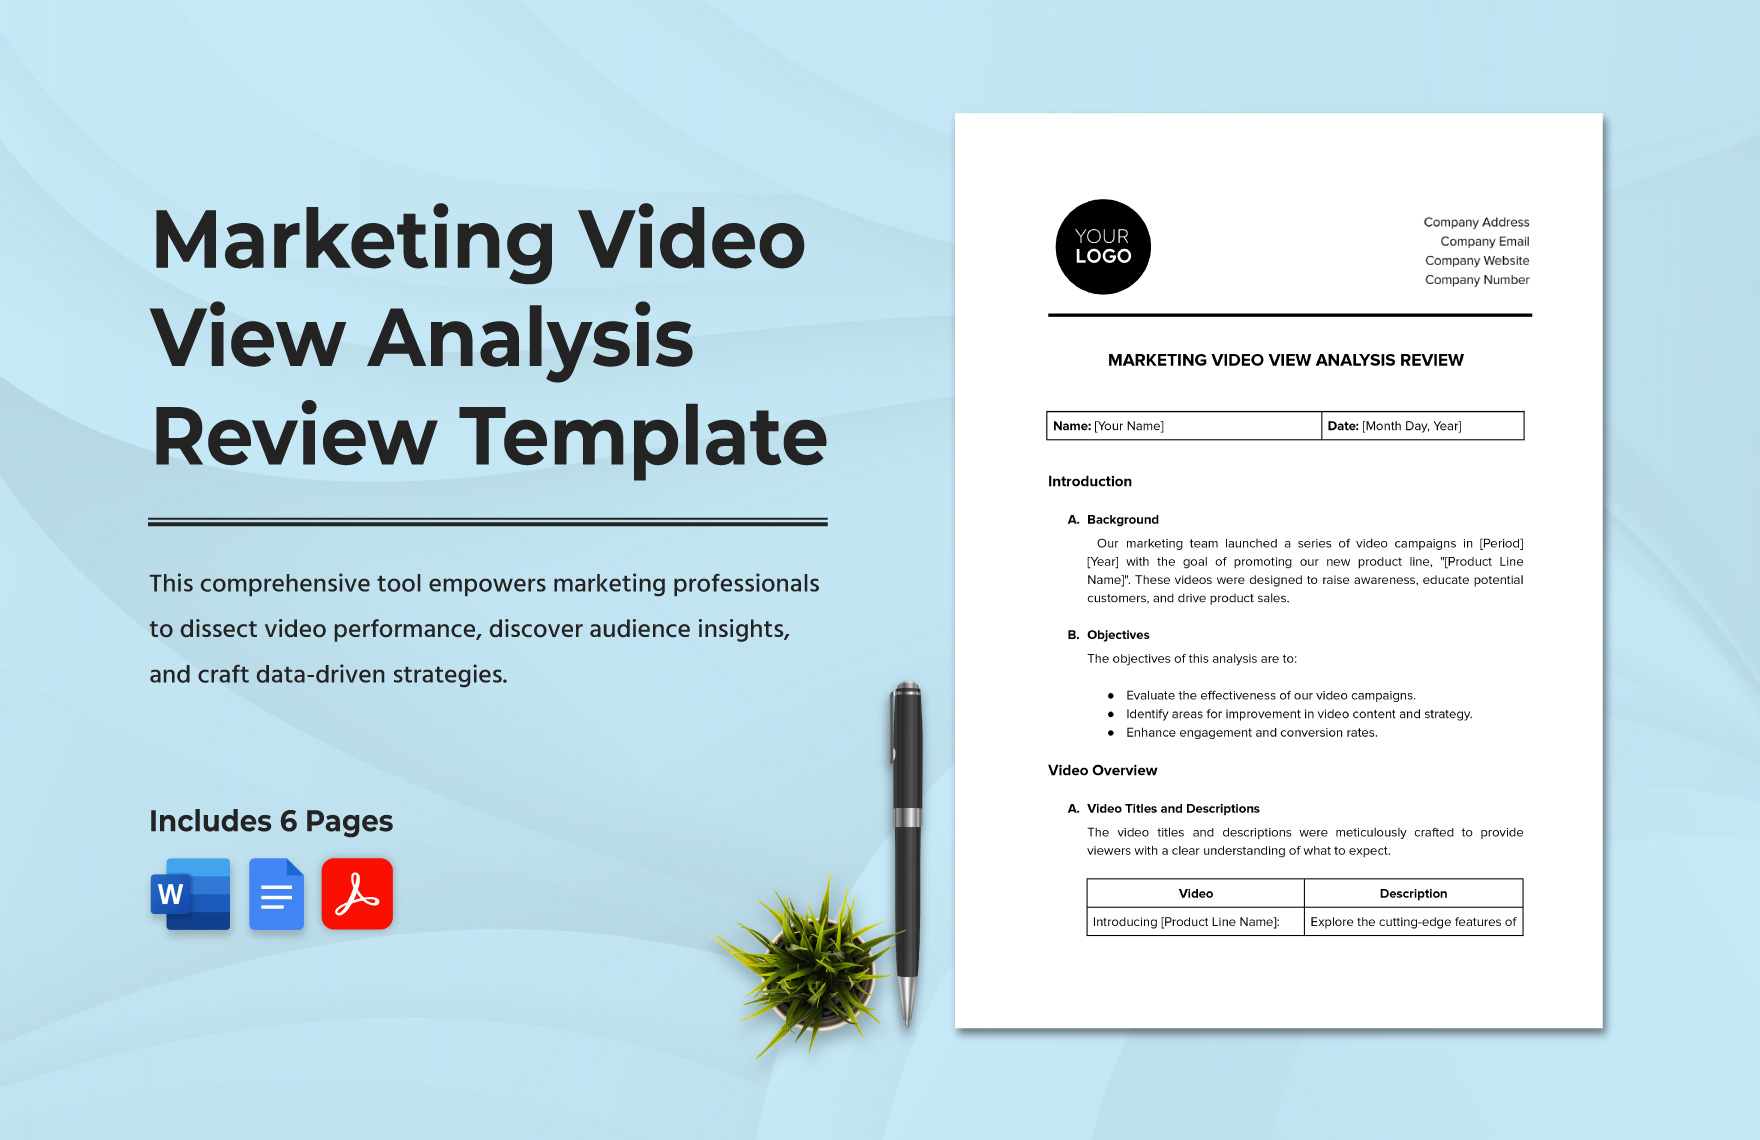 Marketing Video View Analysis Review Template